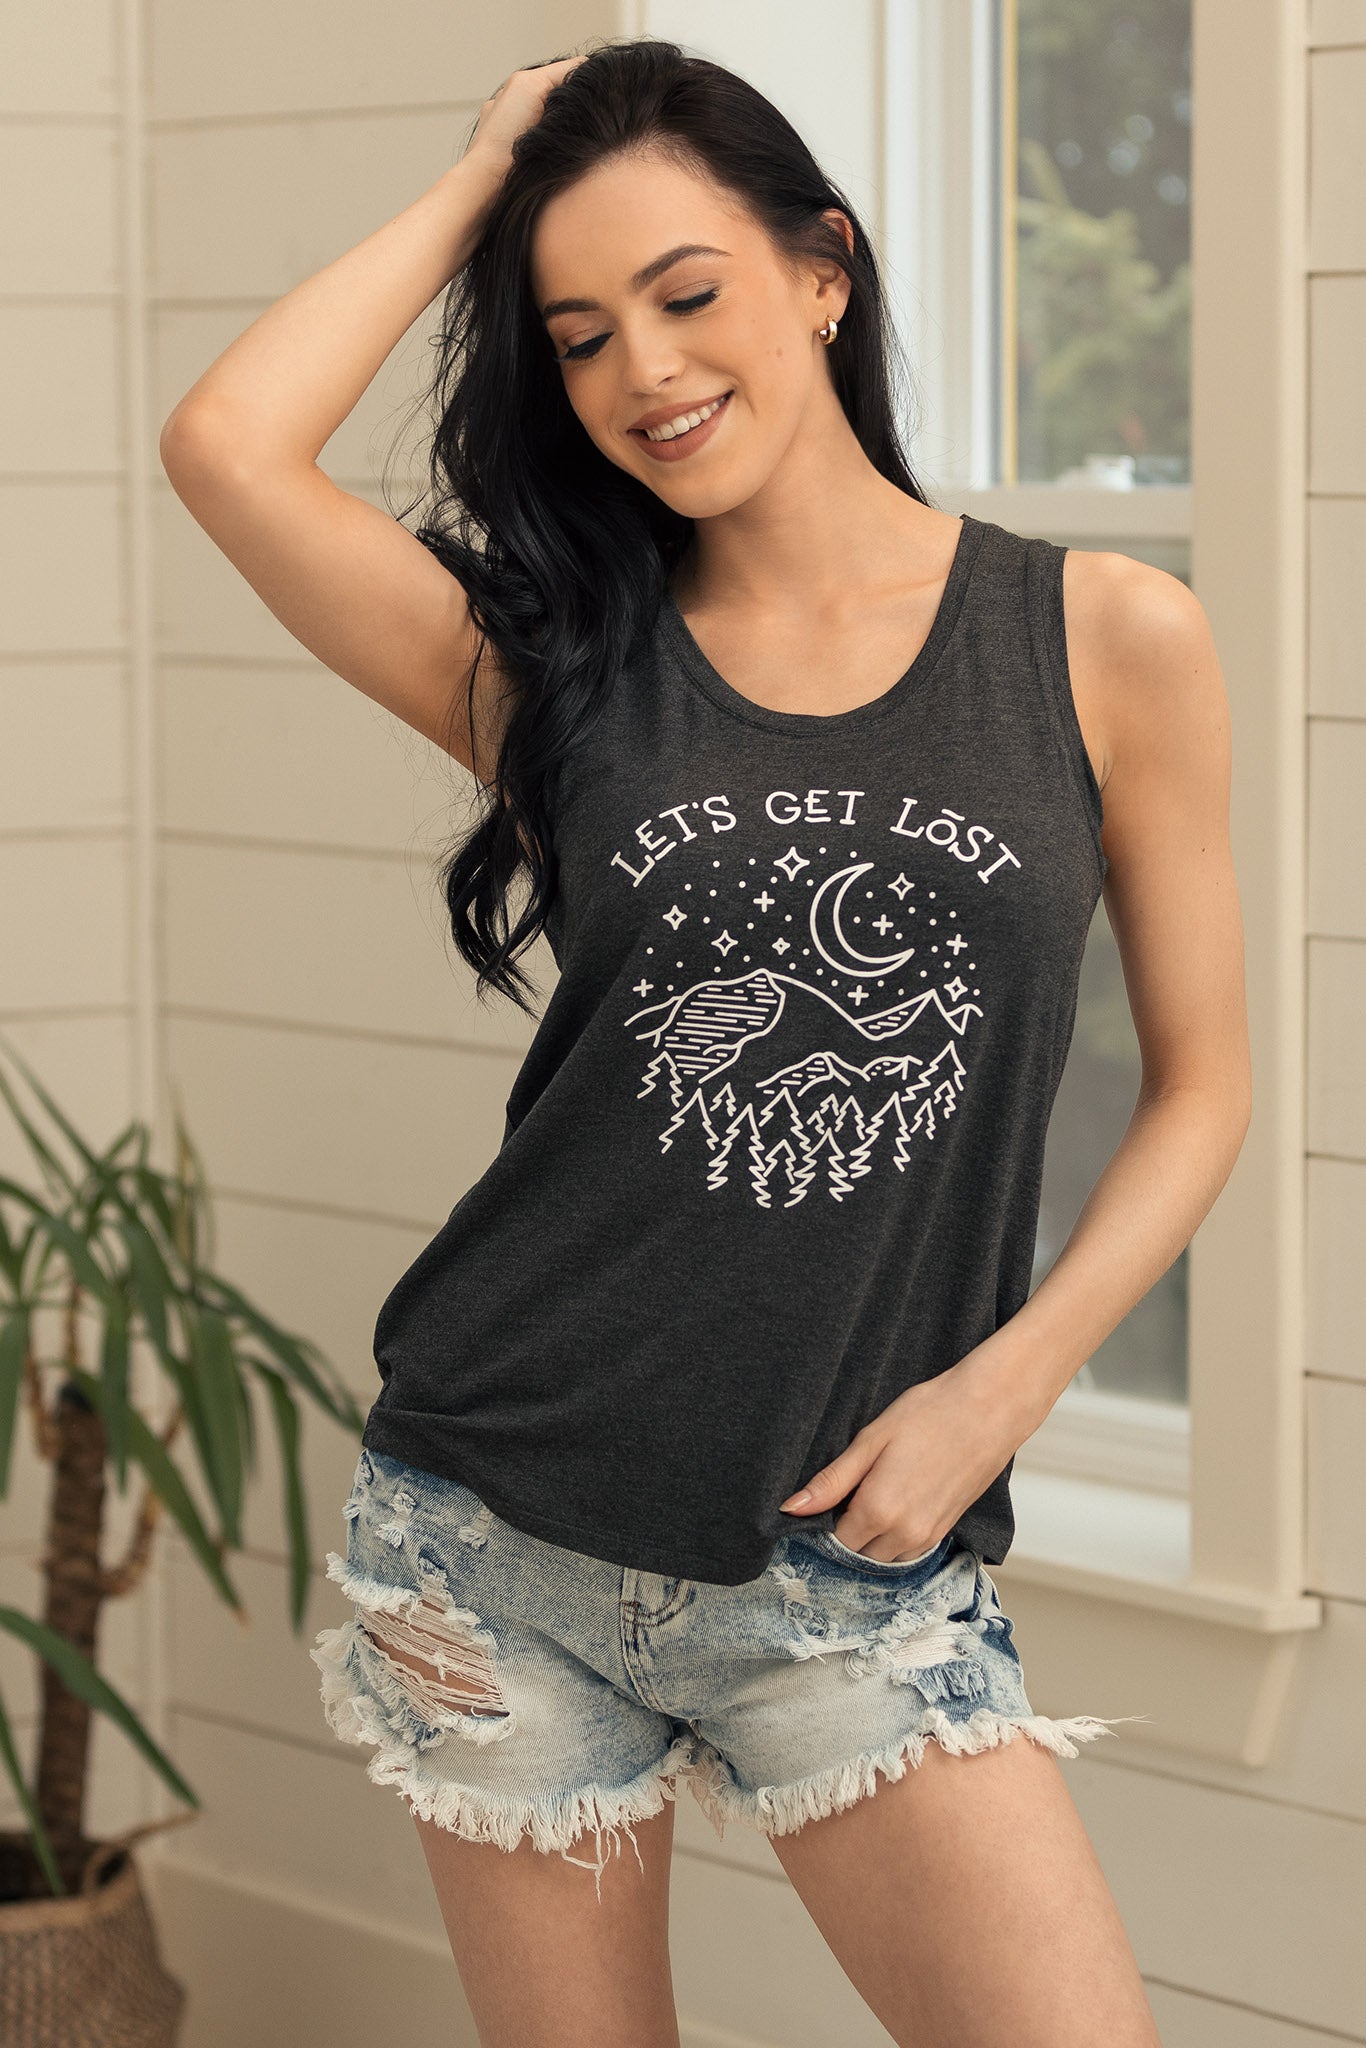 "Let's Get Lost" Graphic Tank